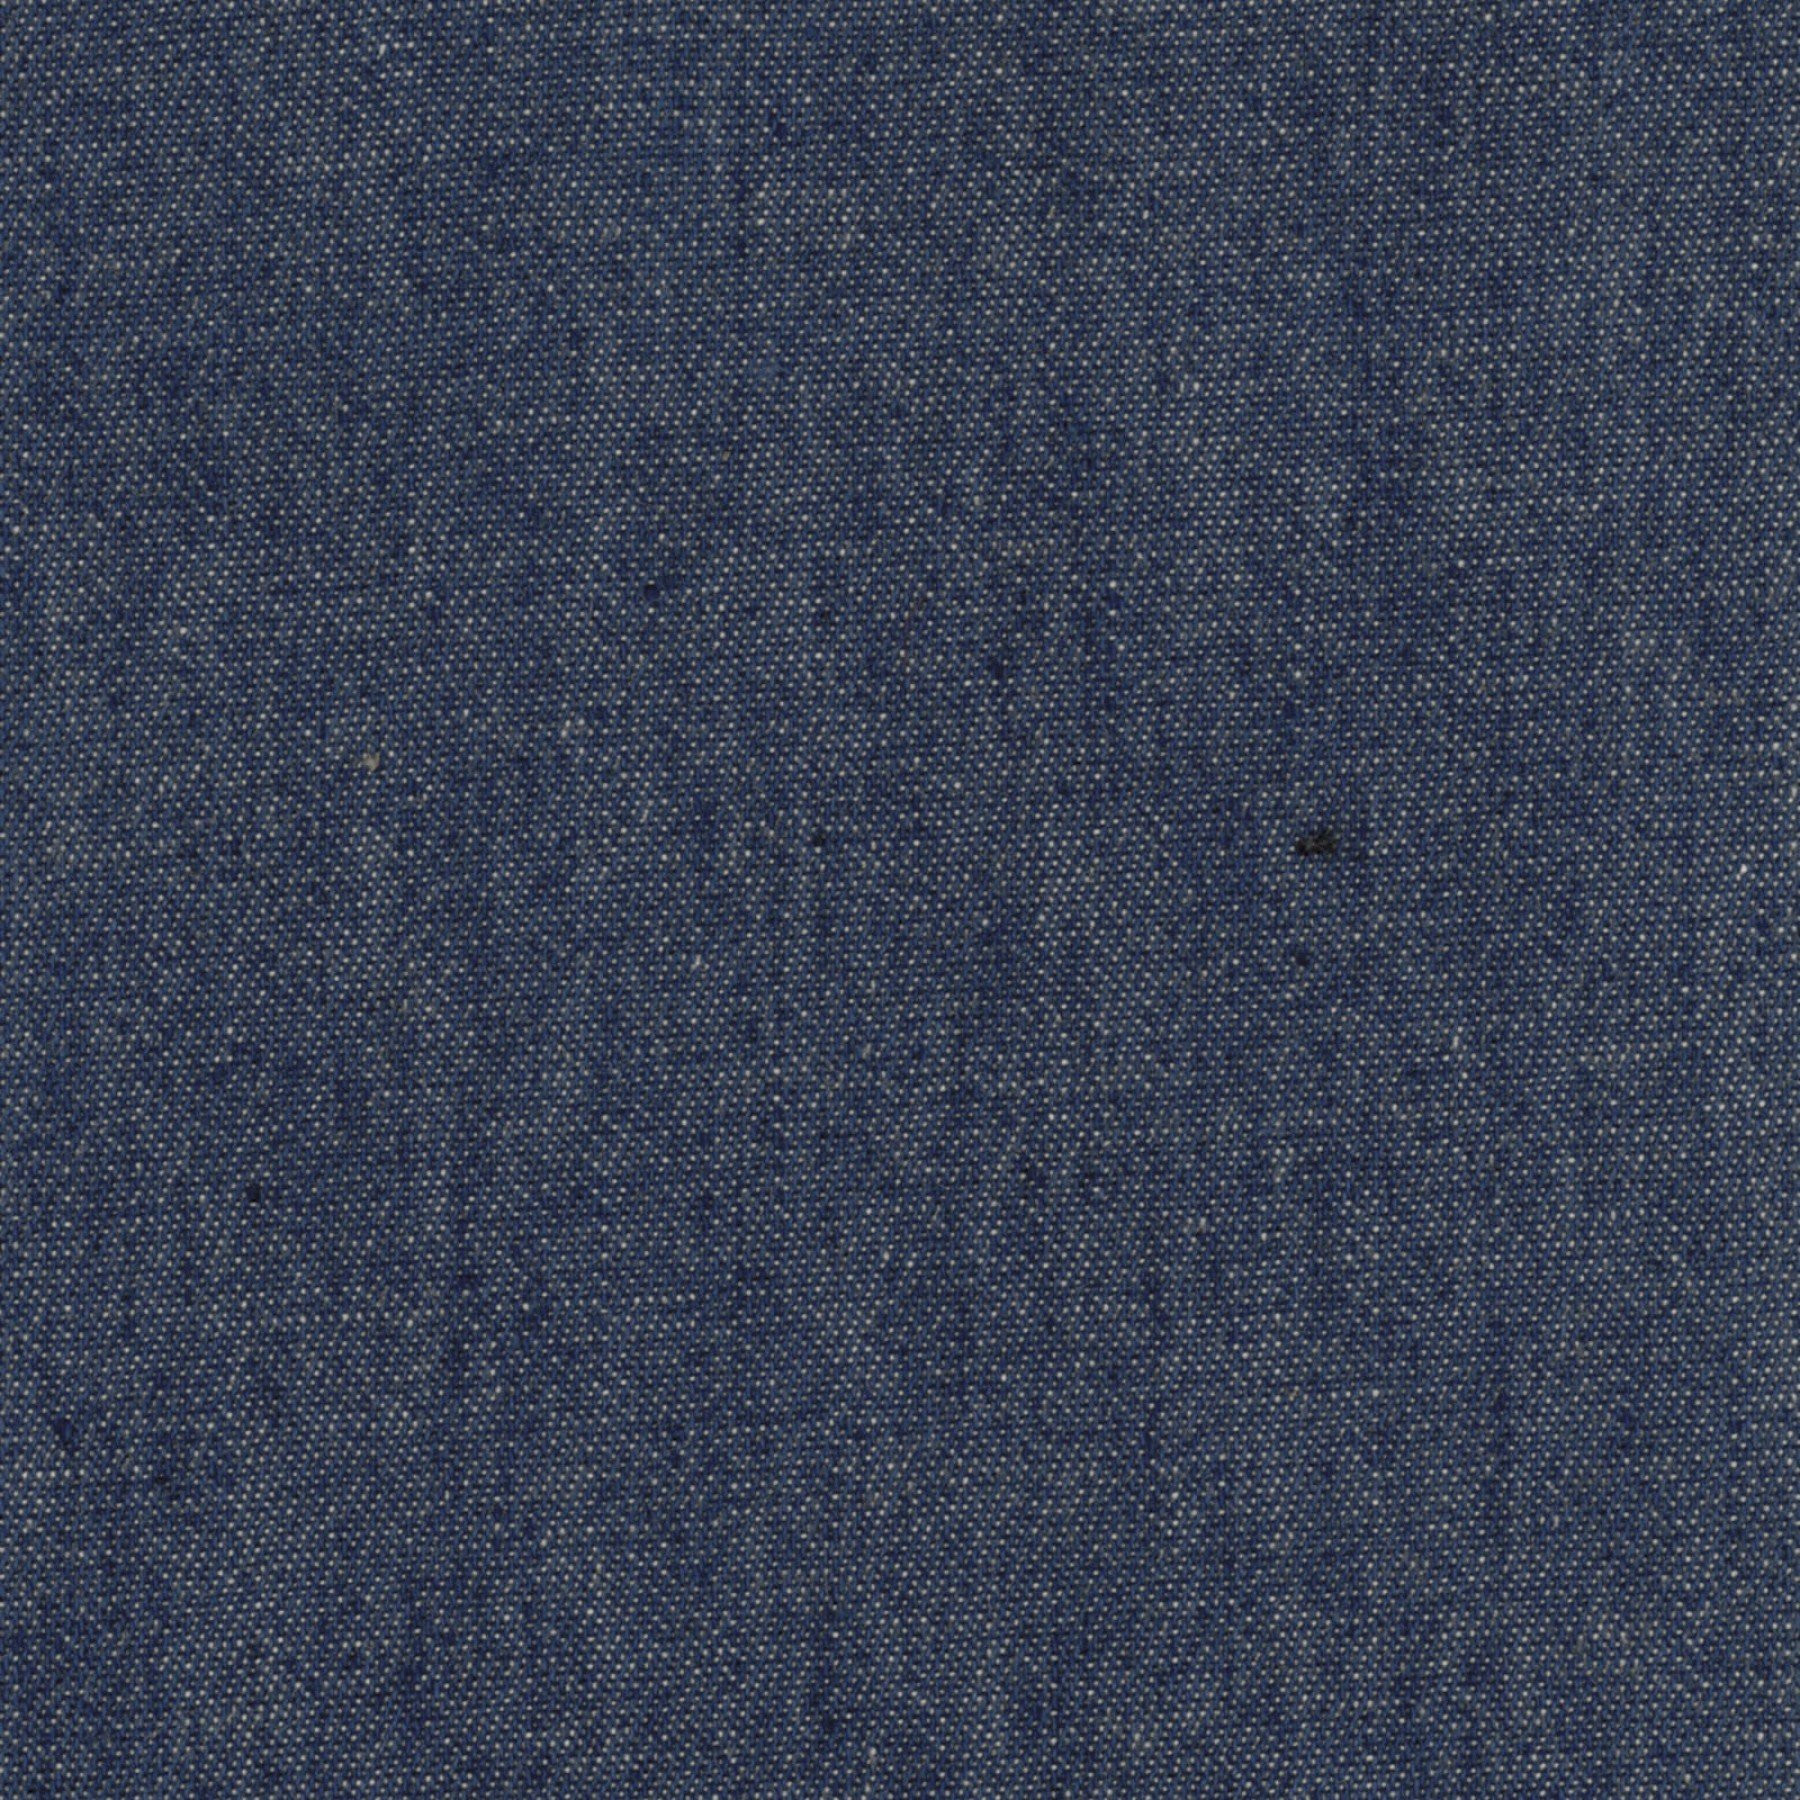 100% Cotton Blue Jeans Fabric Lightweight Denim Fabric By The Yard